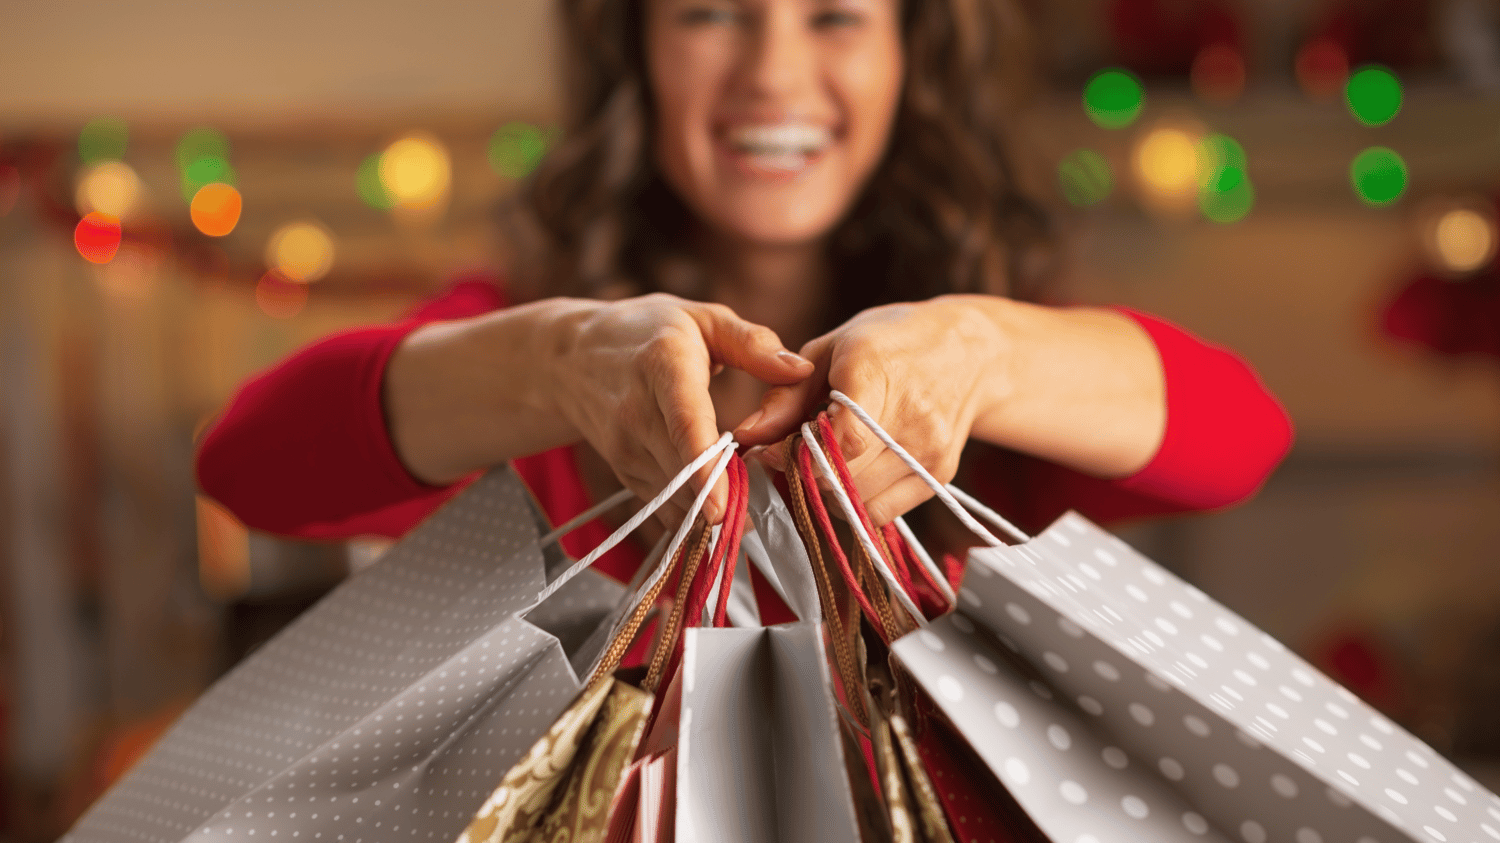 PRACTICAL WAYS TO SAVE MONEY ON HOLIDAY SHOPPING